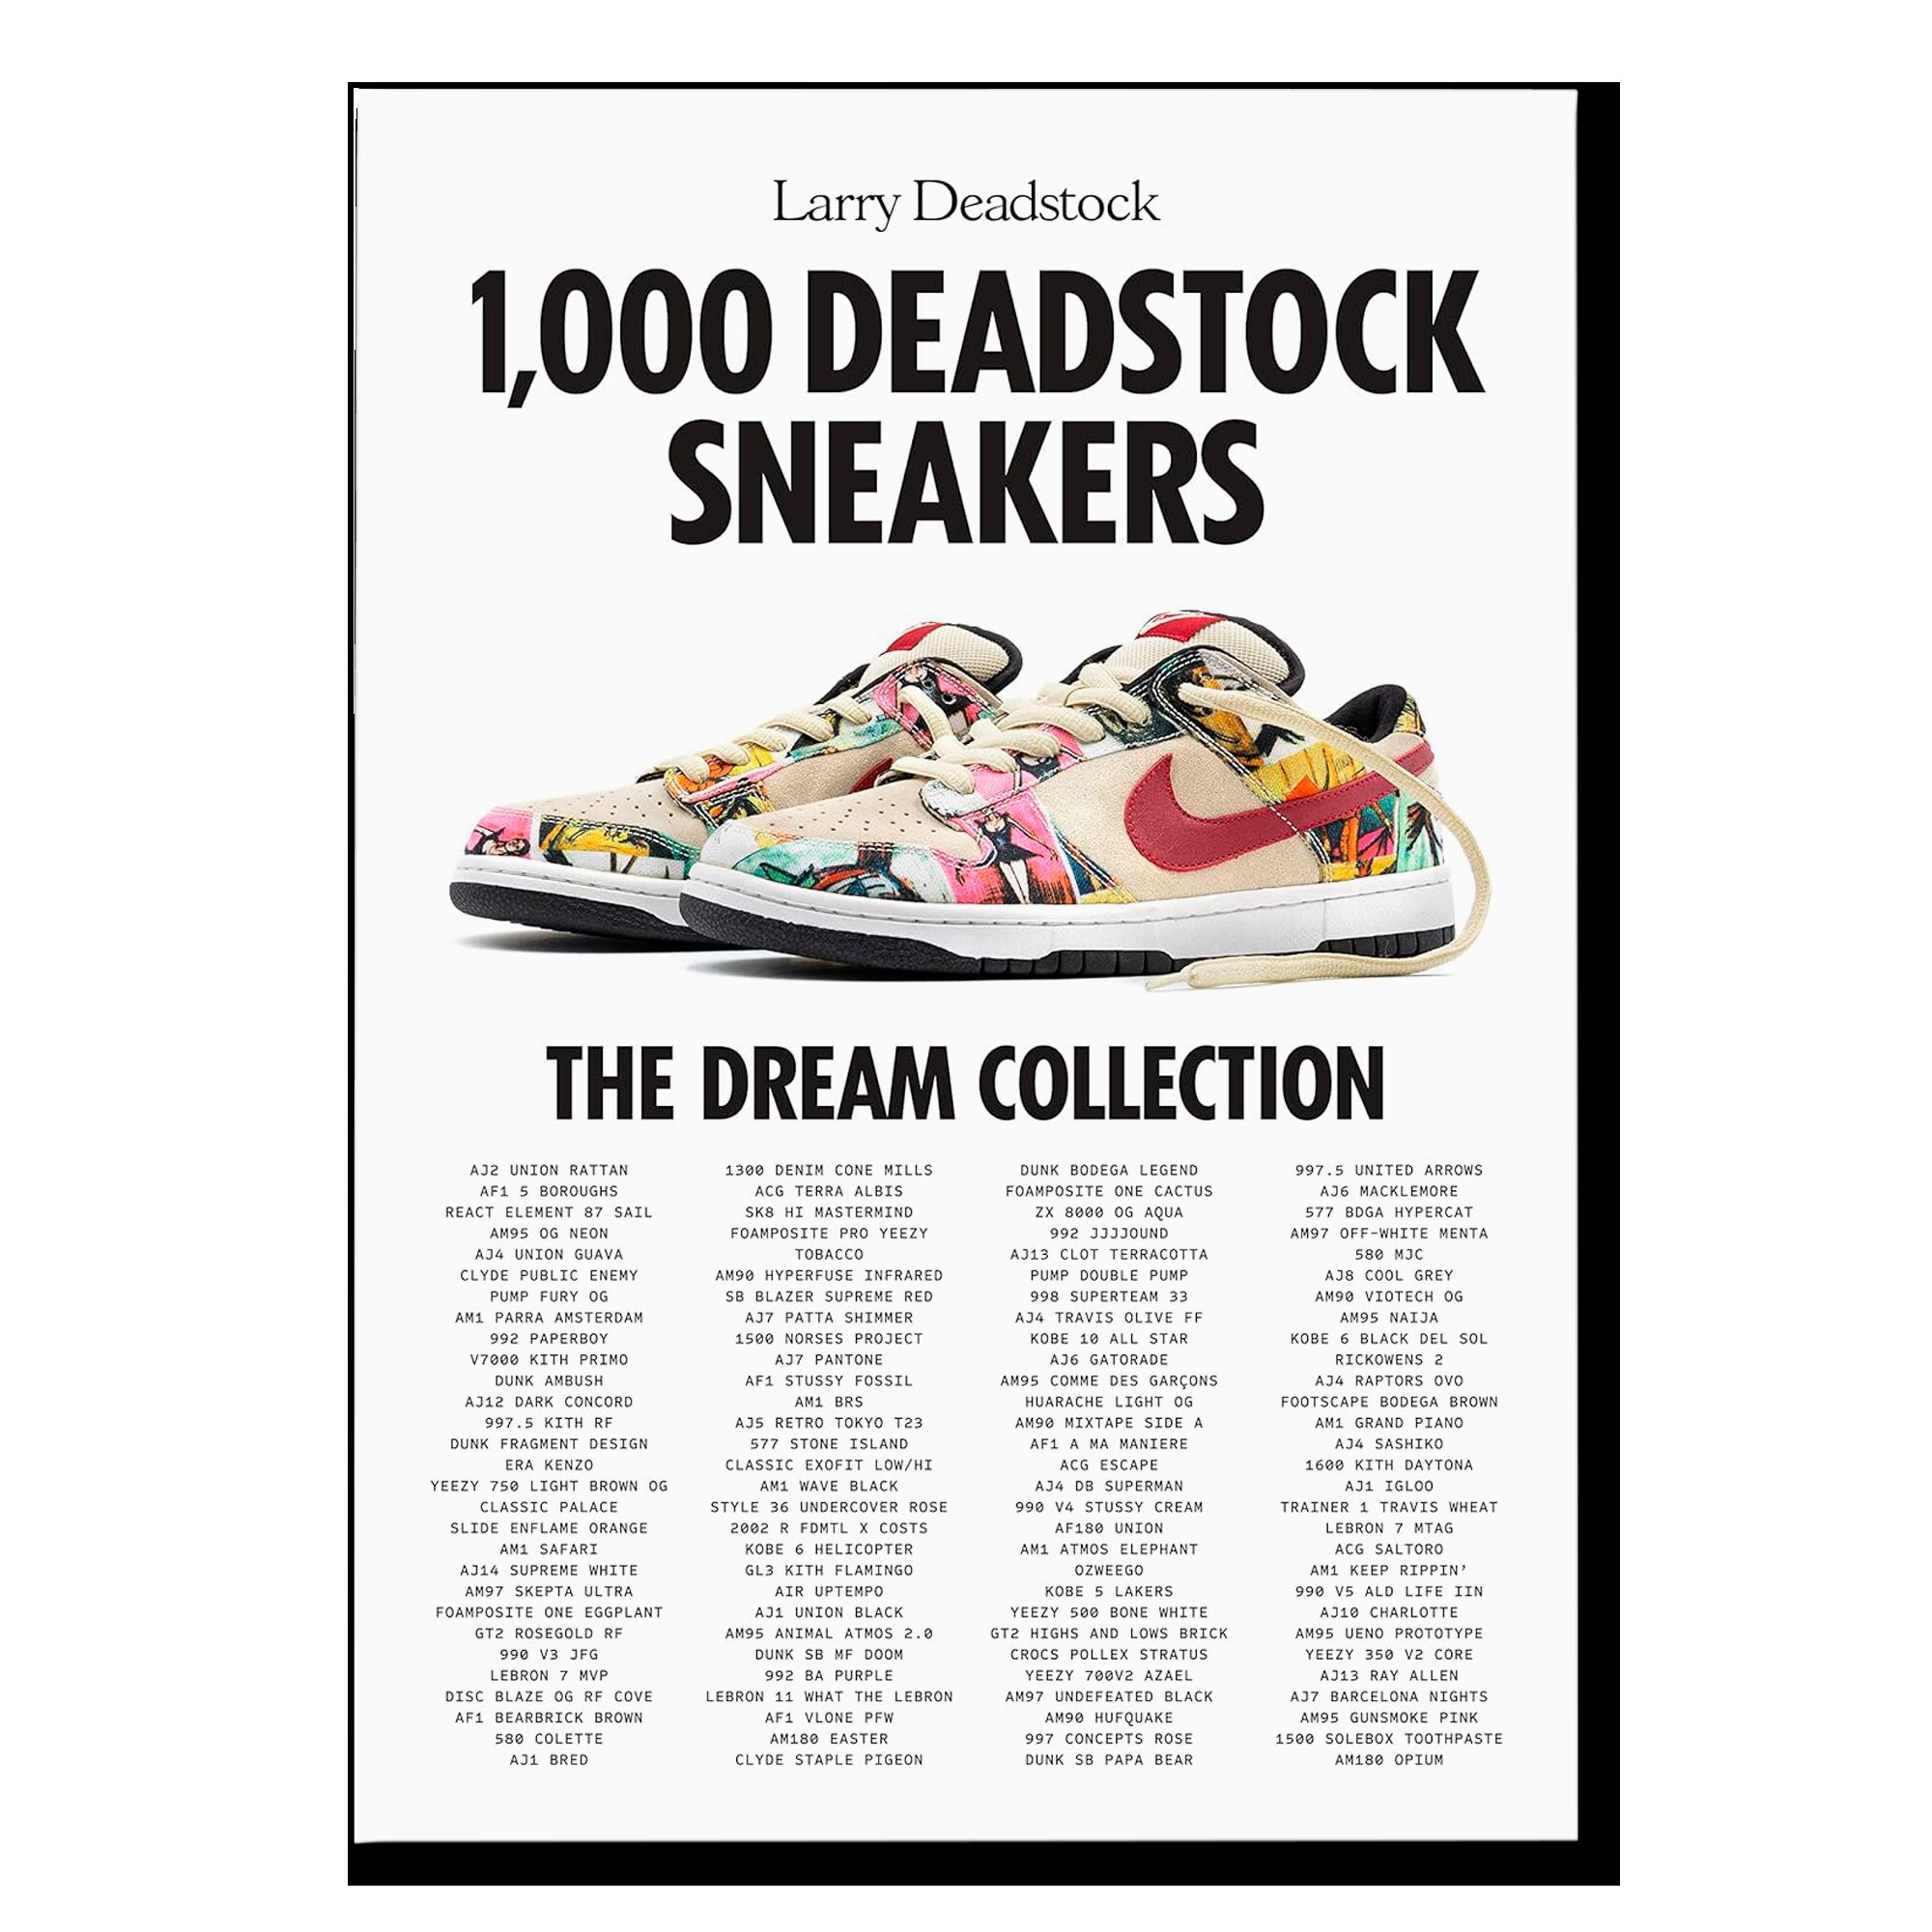 1,000 Deadstock Sneakers: The Dream Collection